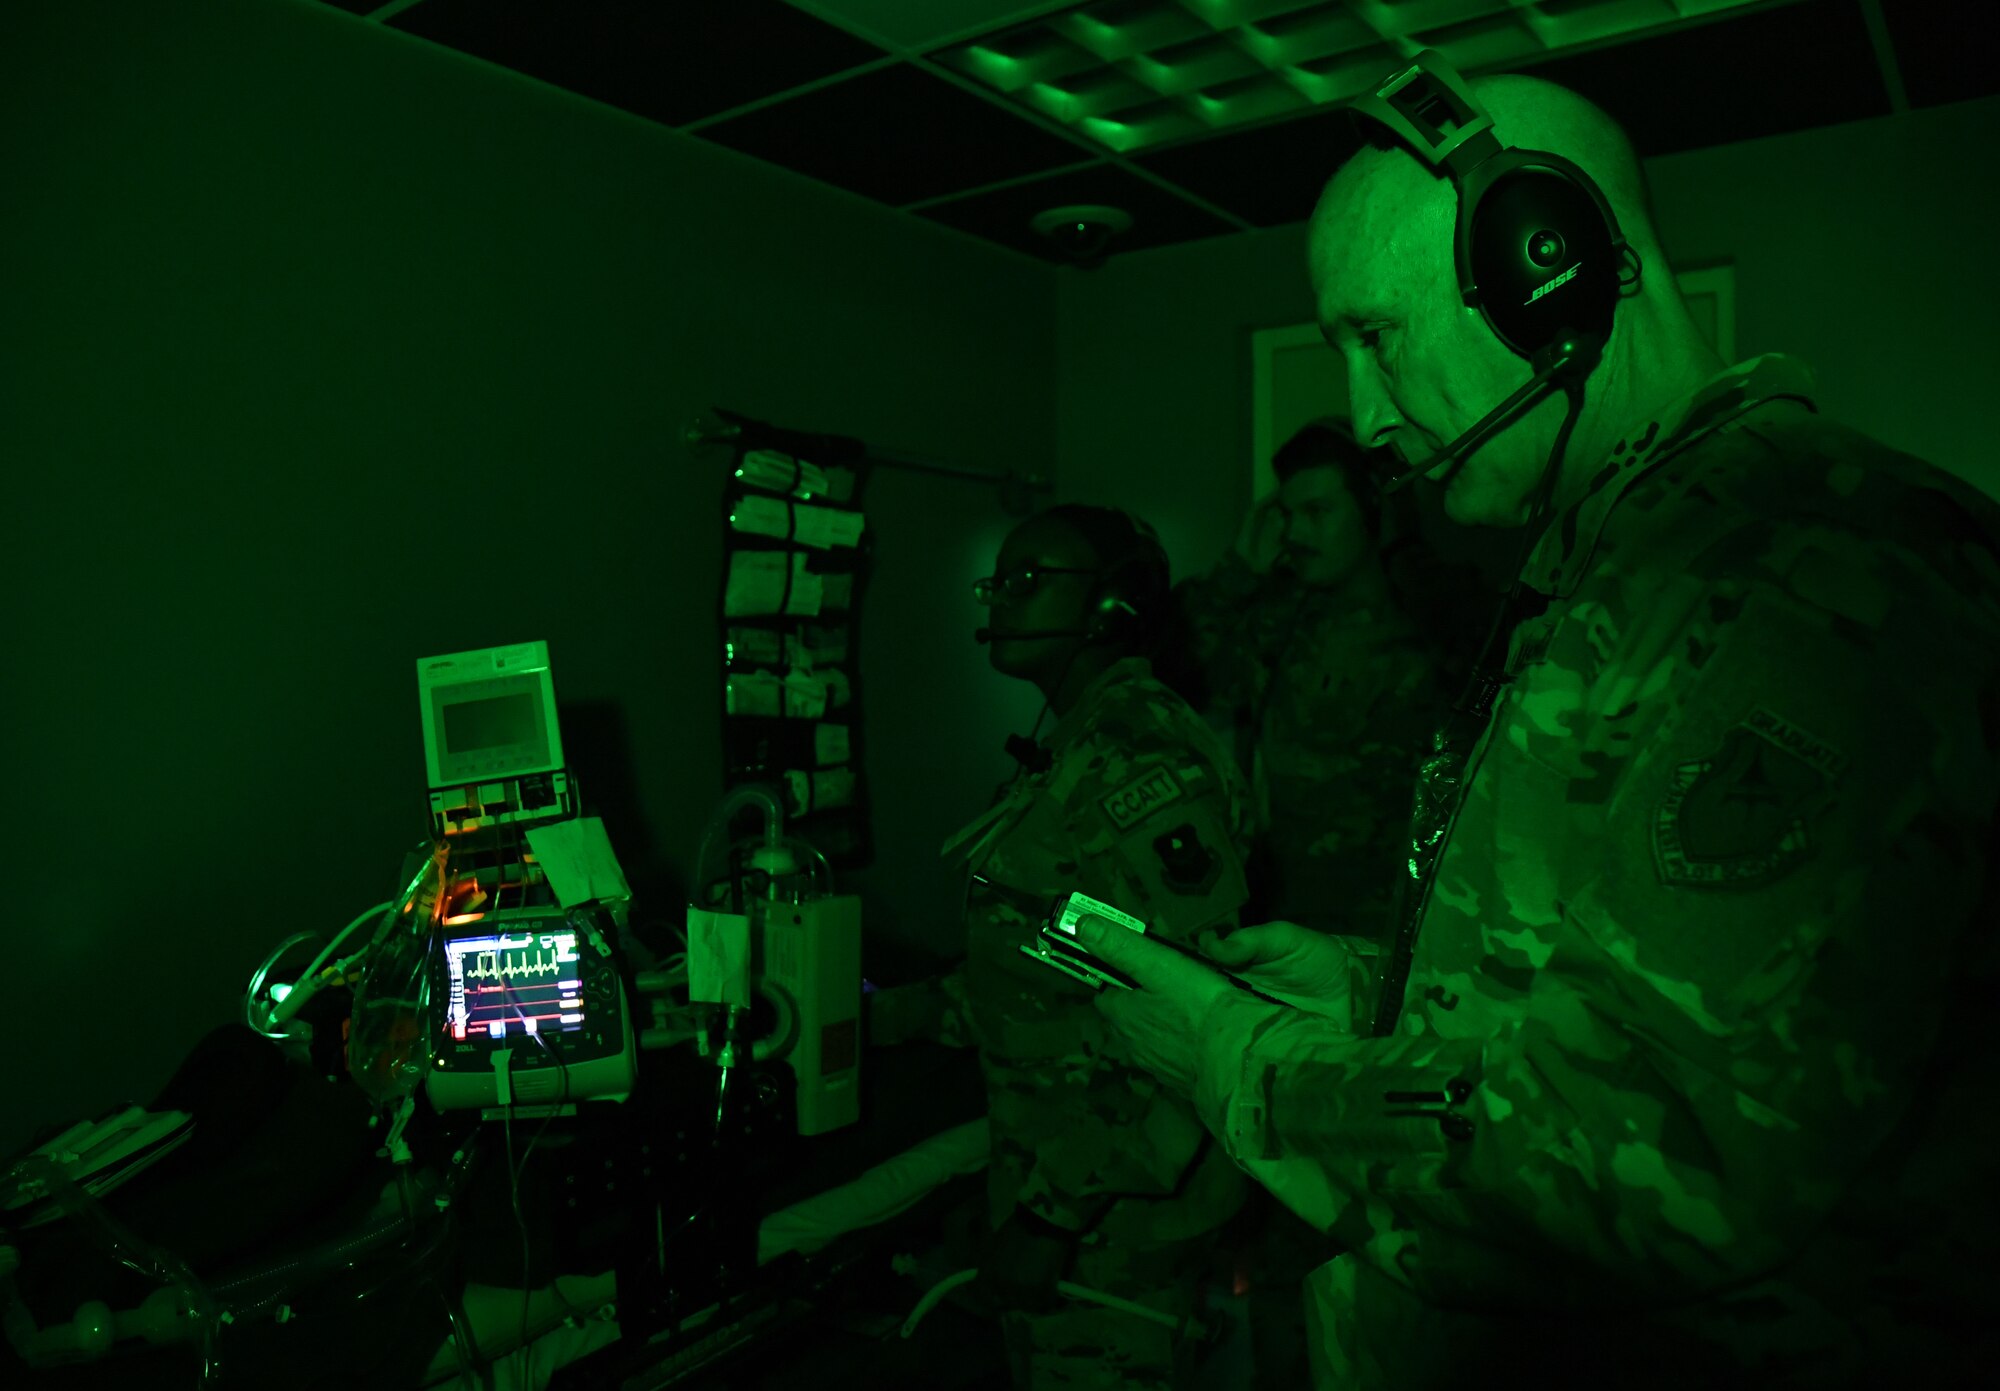 U.S. Air Force Gen. David Allvin, Vice Chief of Staff of the Air Force, participates in a critical care air transport demonstration inside the Keesler Medical Center at Keesler Air Force Base, Mississippi, Nov. 18, 2022.